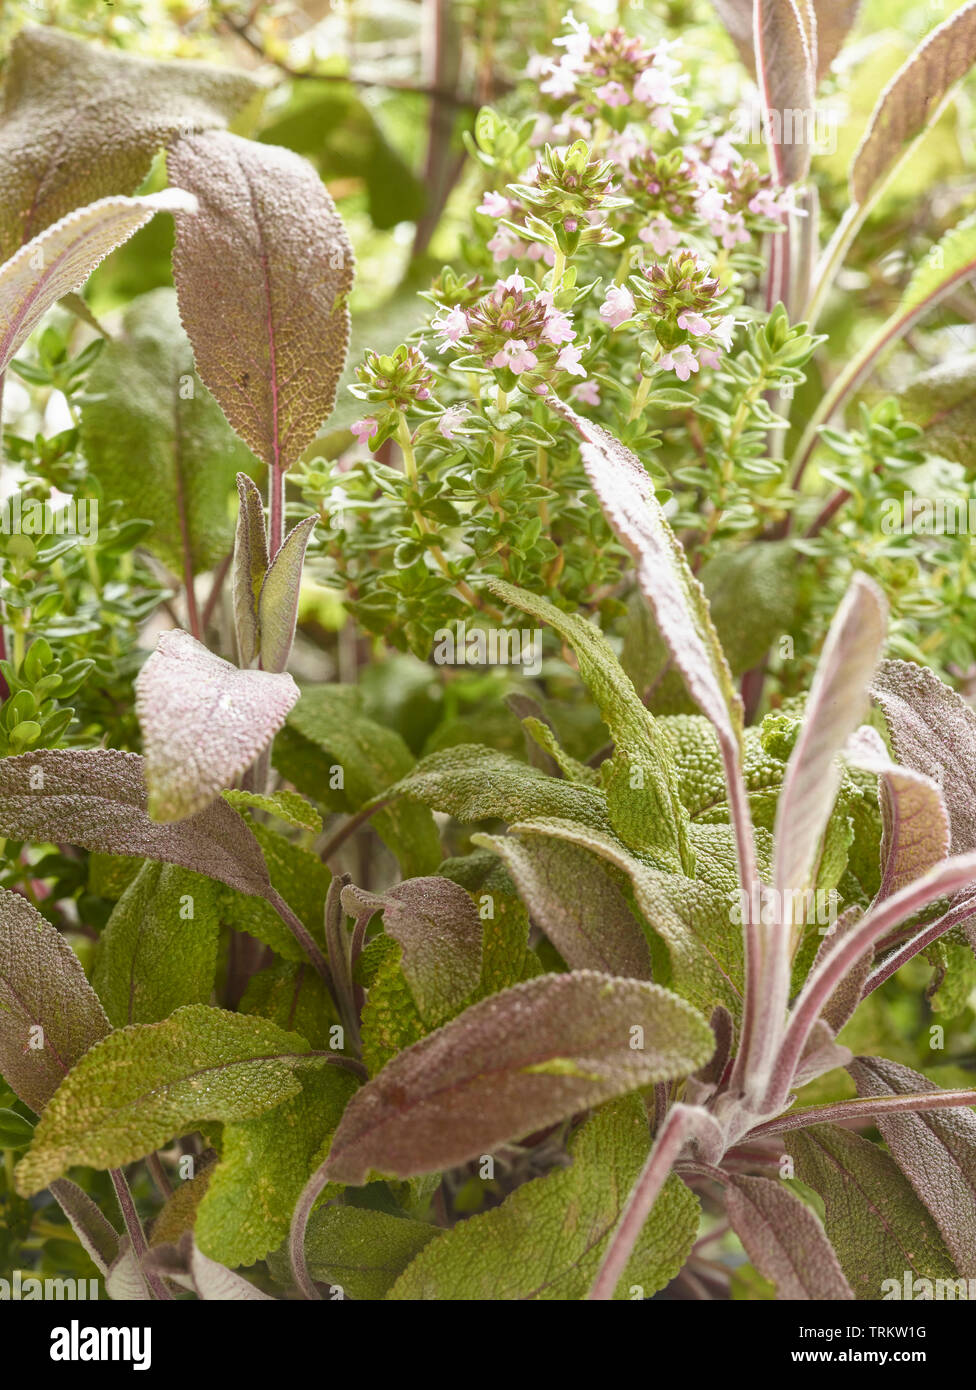 Sage and Thymeherbs growing together in the sunshine in an English country garden, United Kingdom, Europe Stock Photo